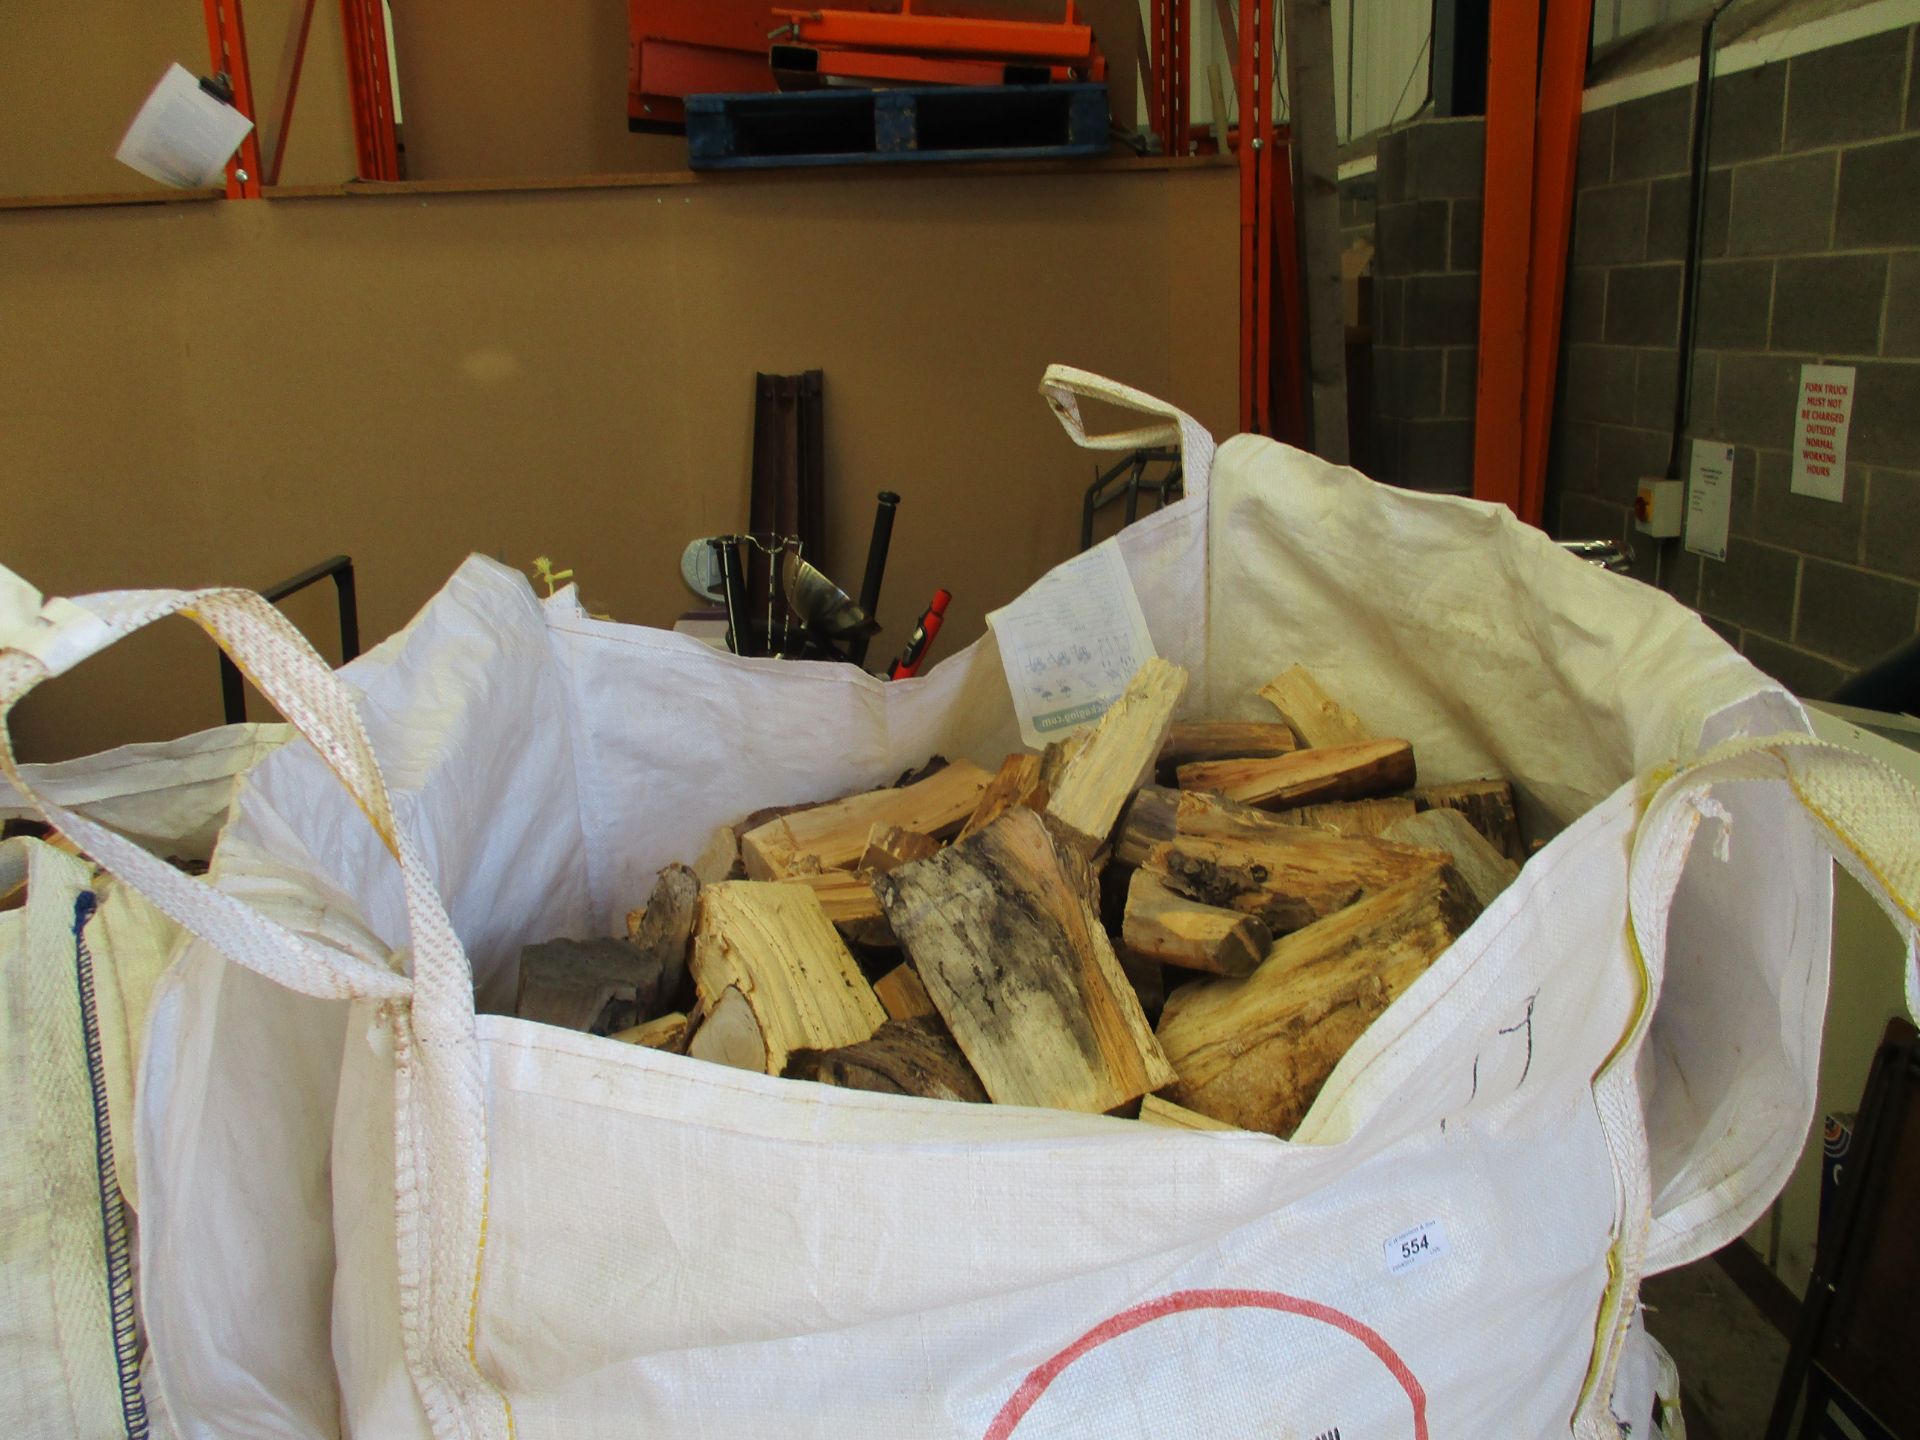 Contents to a large builders sack - extra dry mature fire logs